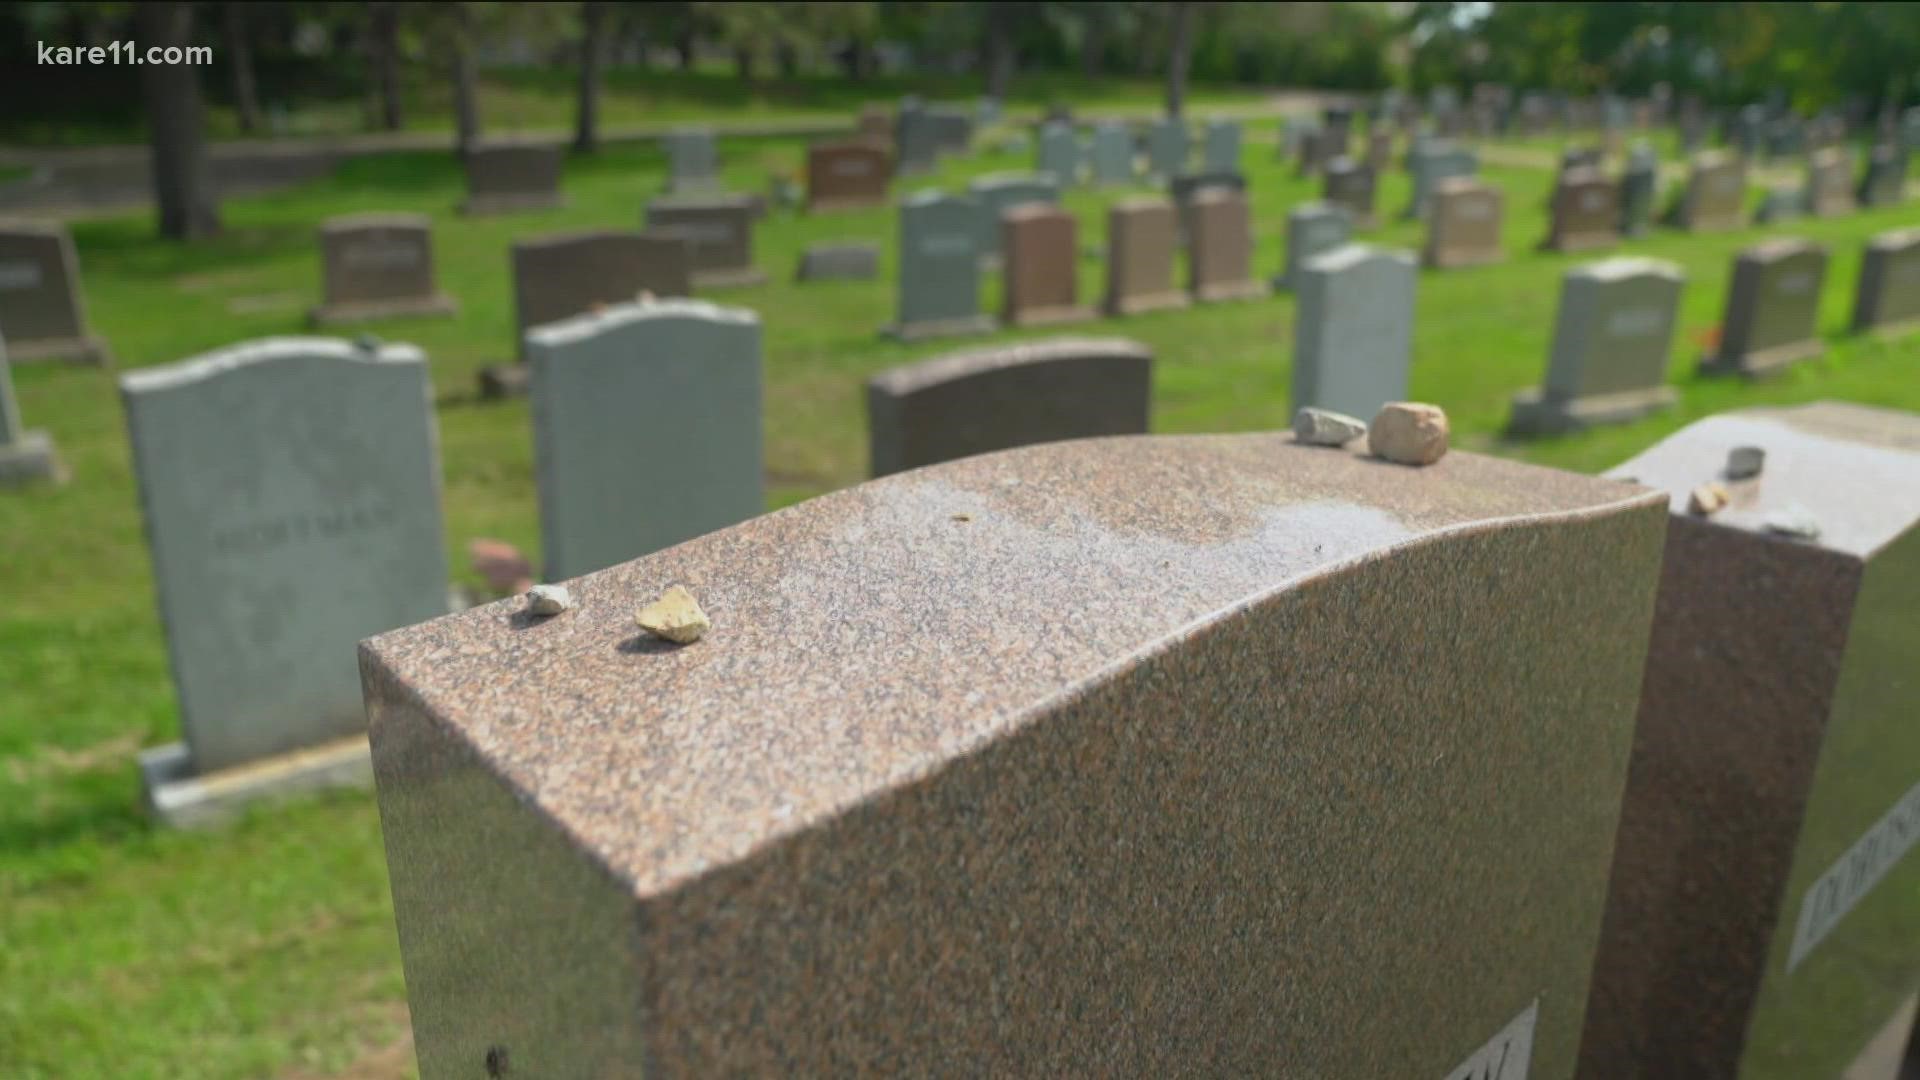 The supervisor of Chesed Shel Emet Cemetery in St. Paul found on Thursday that 32 memorial monuments had been knocked over.